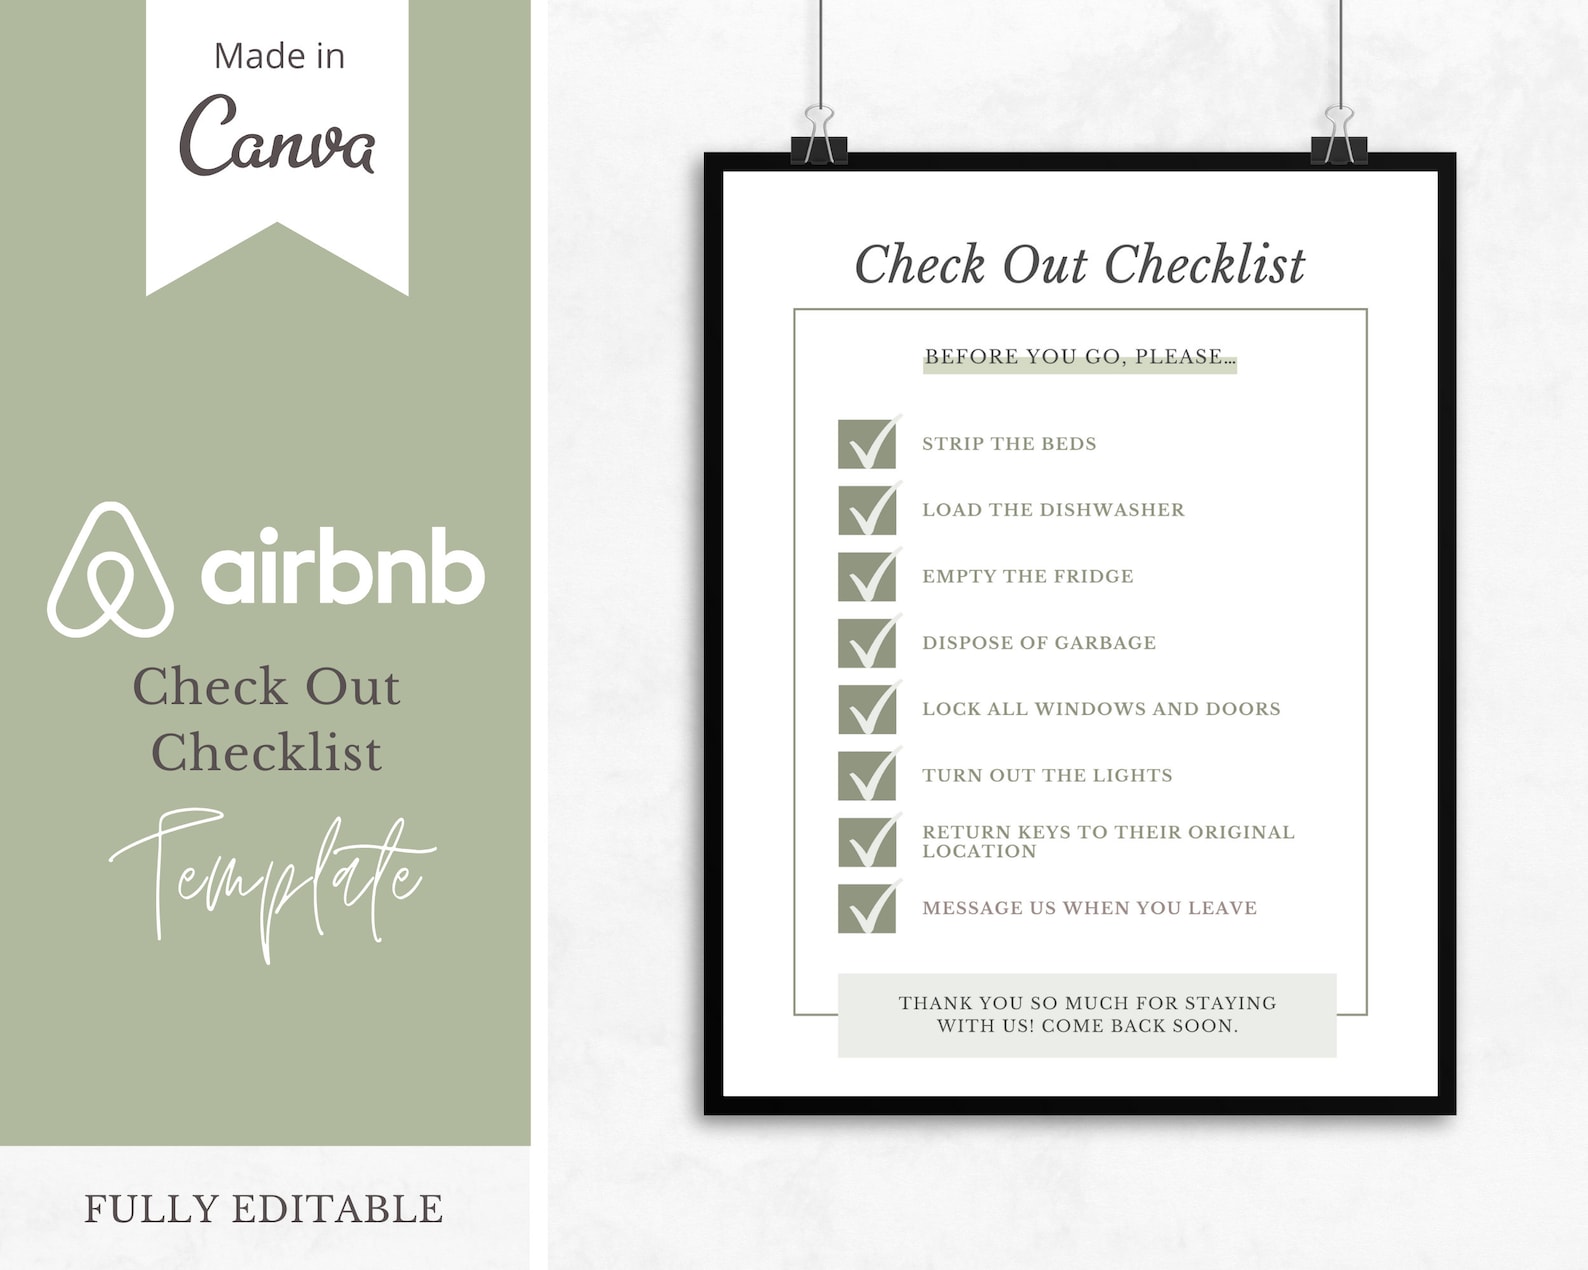 airbnb-guest-check-out-checklist-sign-template-made-in-canva-etsy